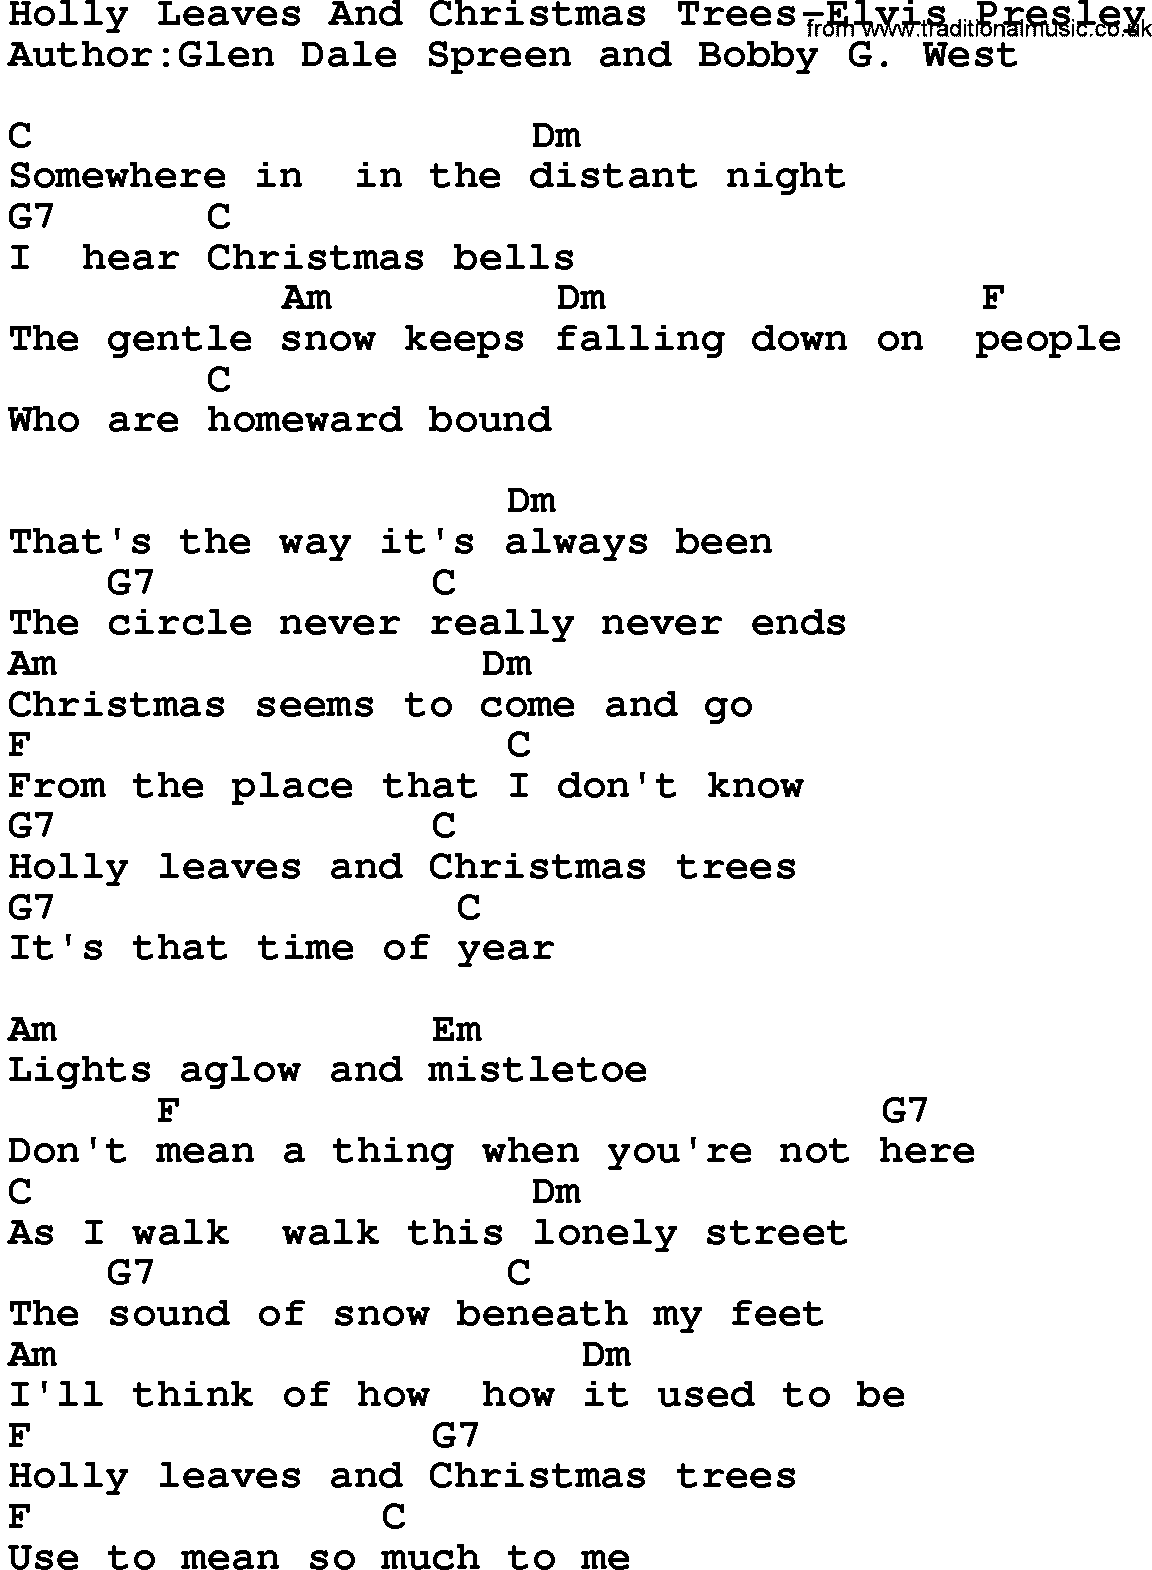 Country music song: Holly Leaves And Christmas Trees-Elvis Presley lyrics and chords